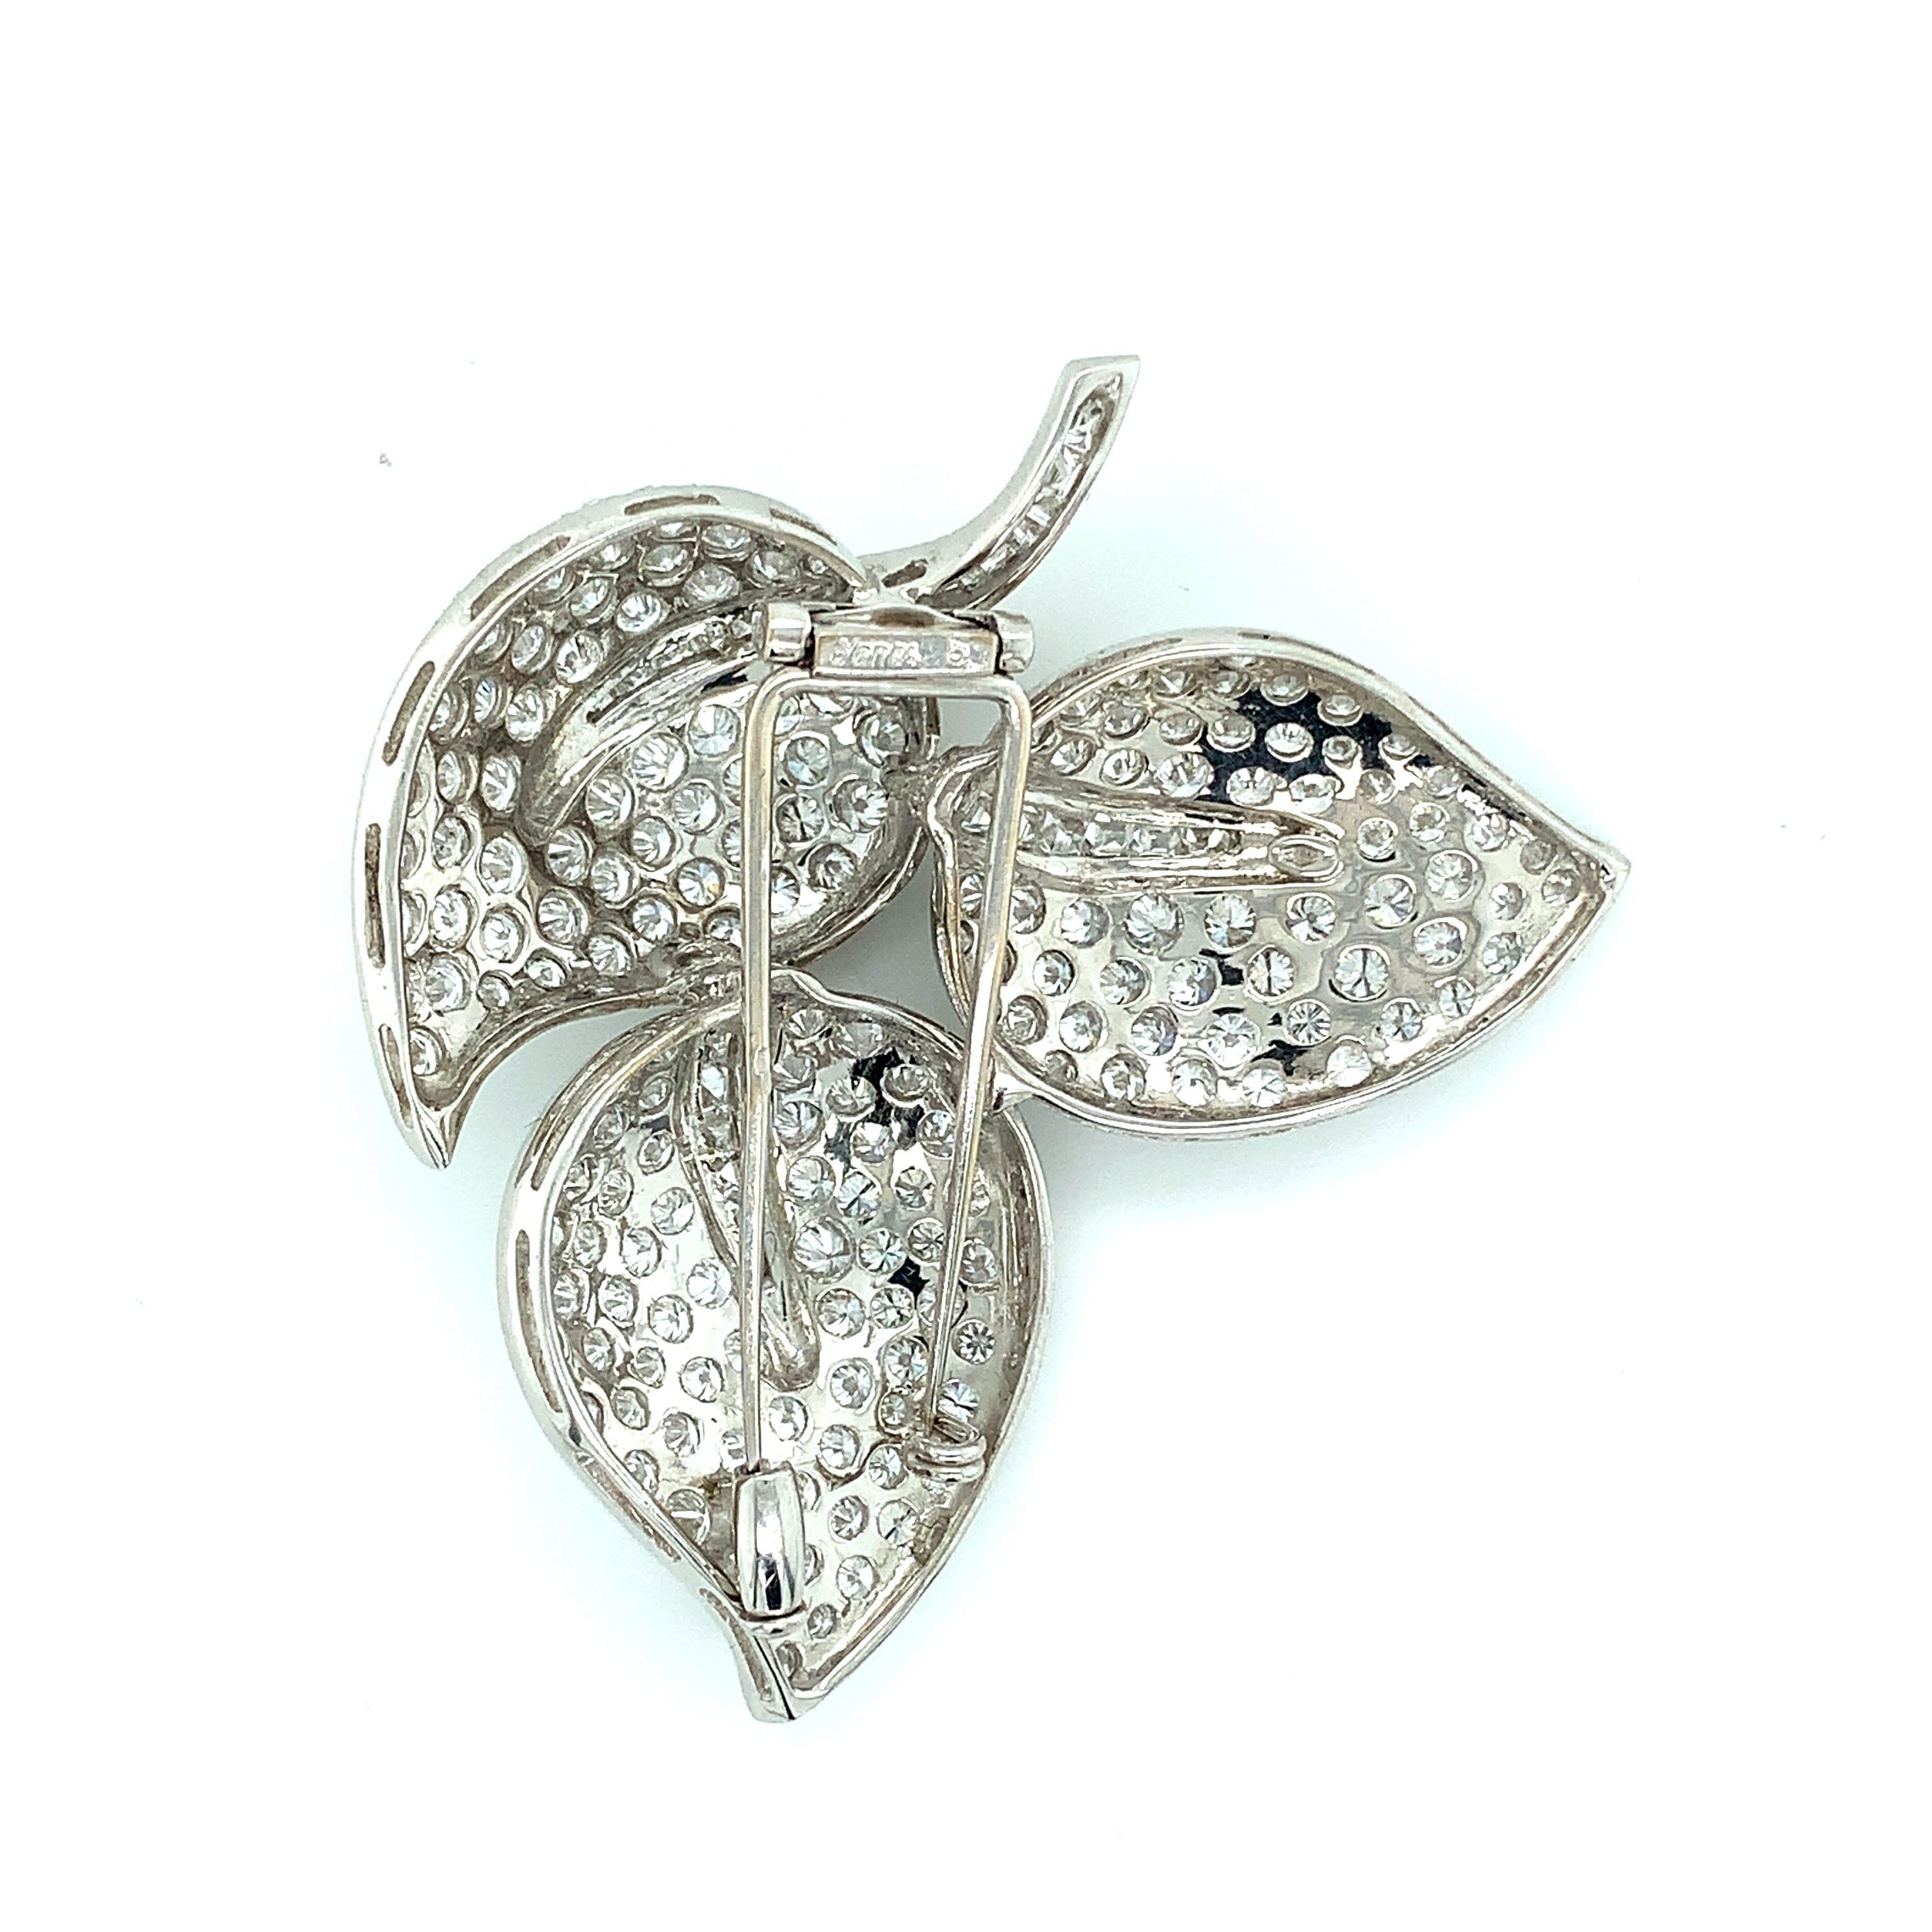 A stunning brooch featuring very nice, beautiful clean diamonds set in 18 karat white gold. It comes in a creative three leaves design. The diamonds weigh approximately 12 carats, which is certain to catch everyone's attention. 

Total weight: 20.5